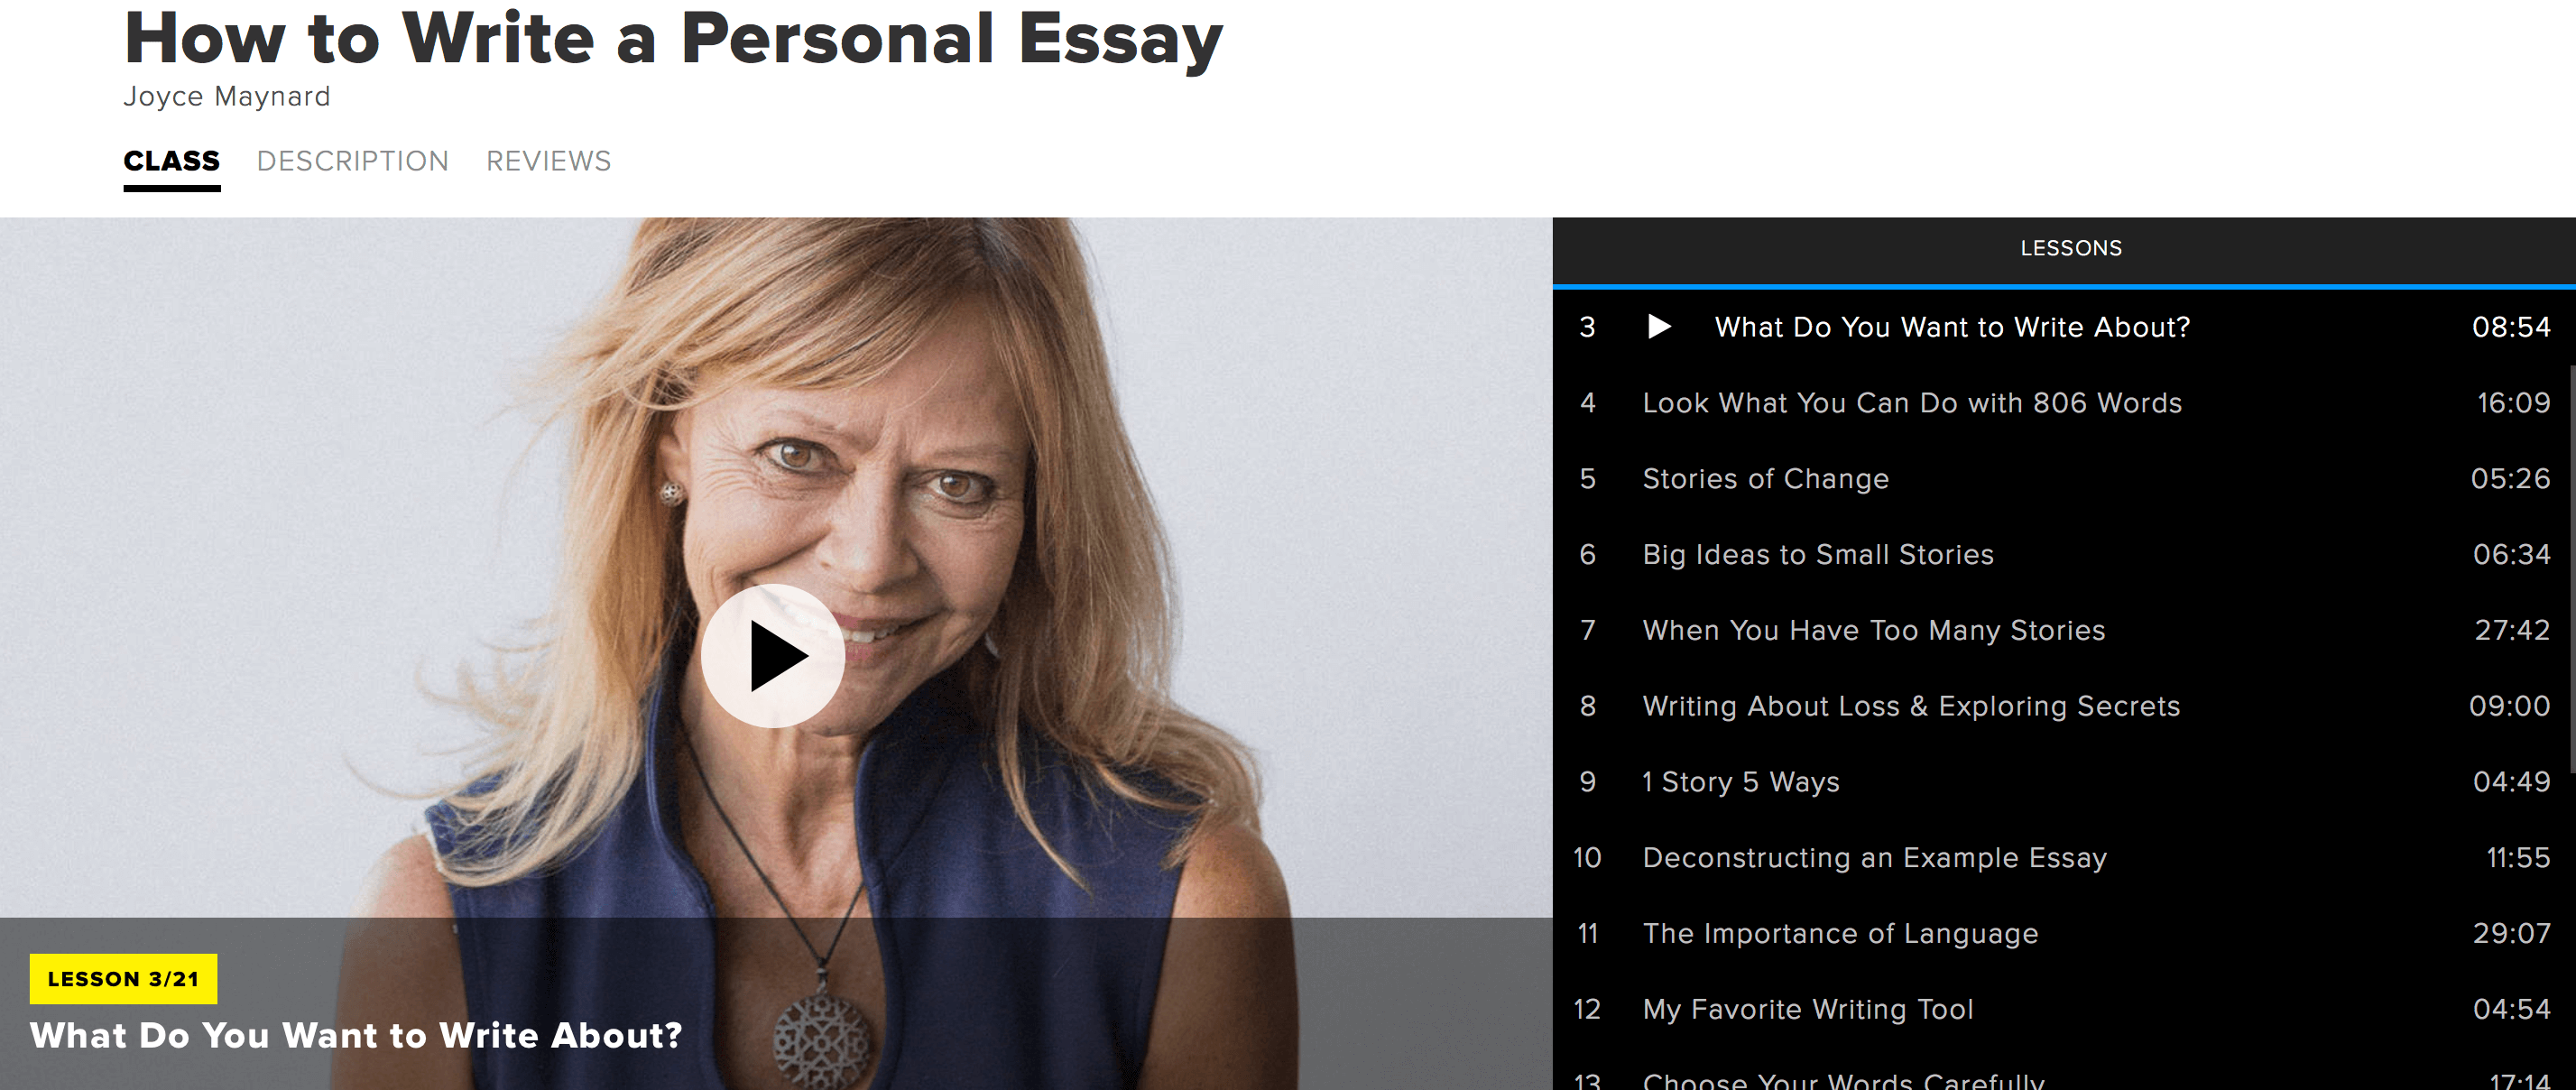 joyce maynard how to write a personal essay creative live course review